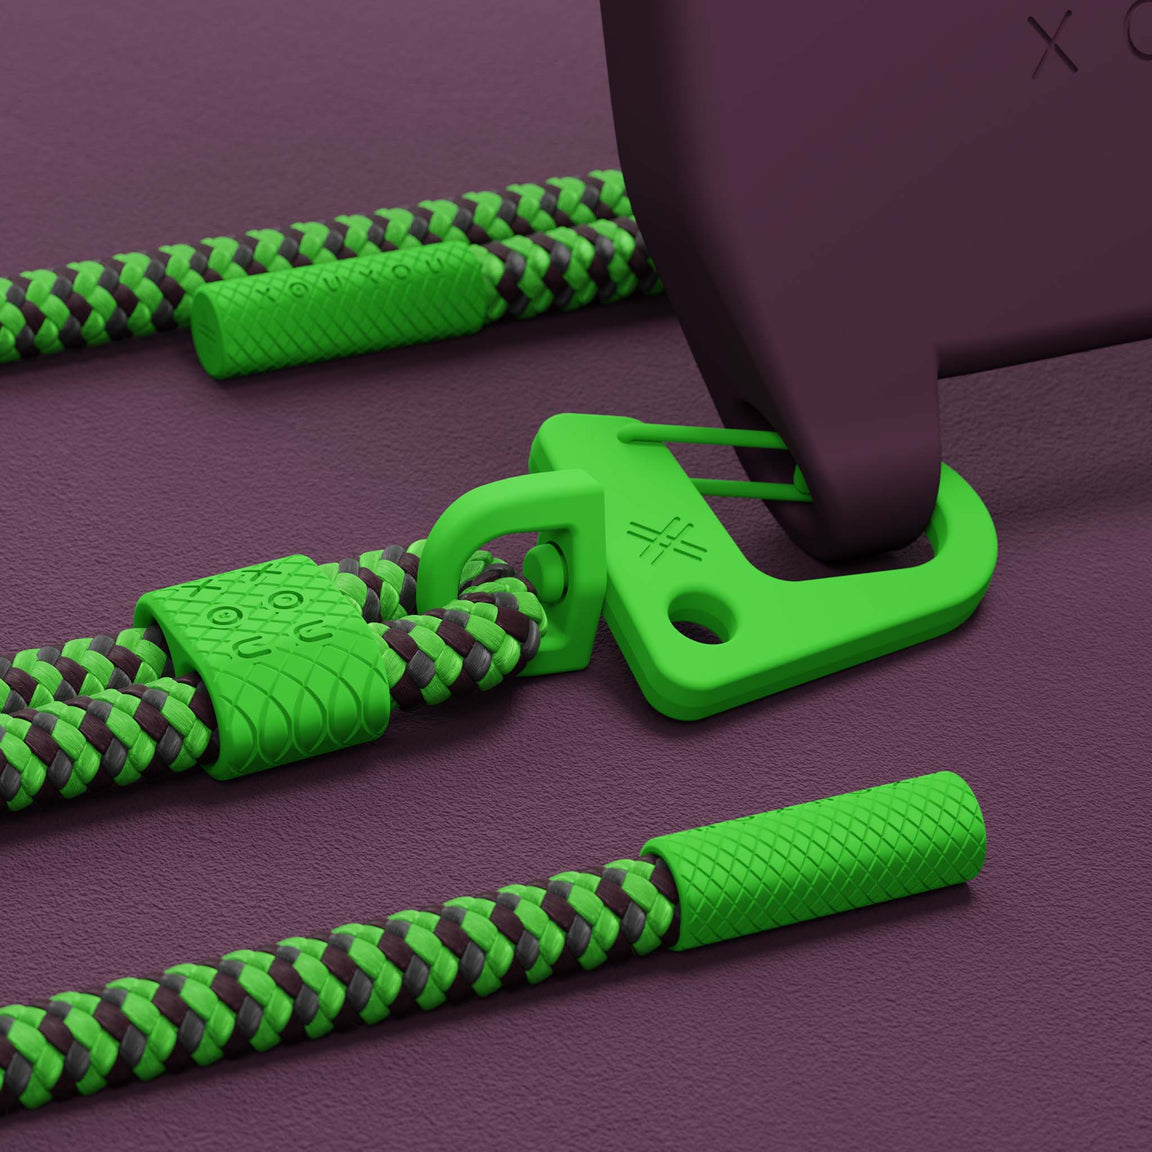 Burgundy iPhone Case with Acid Green Carabiner Rope | XOUXOU